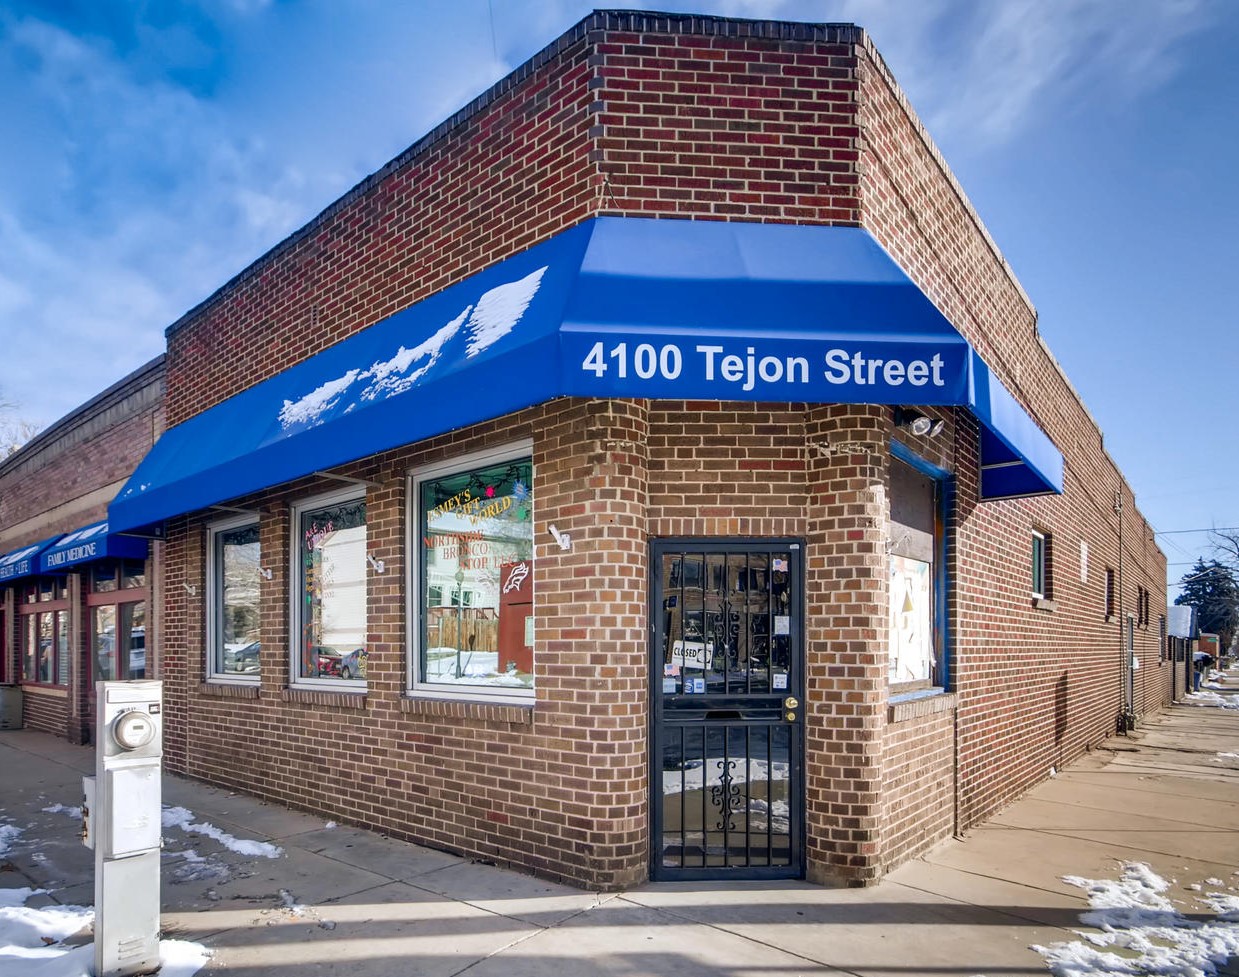 4100 Tejon Street Acquired by Local Sushi Chef